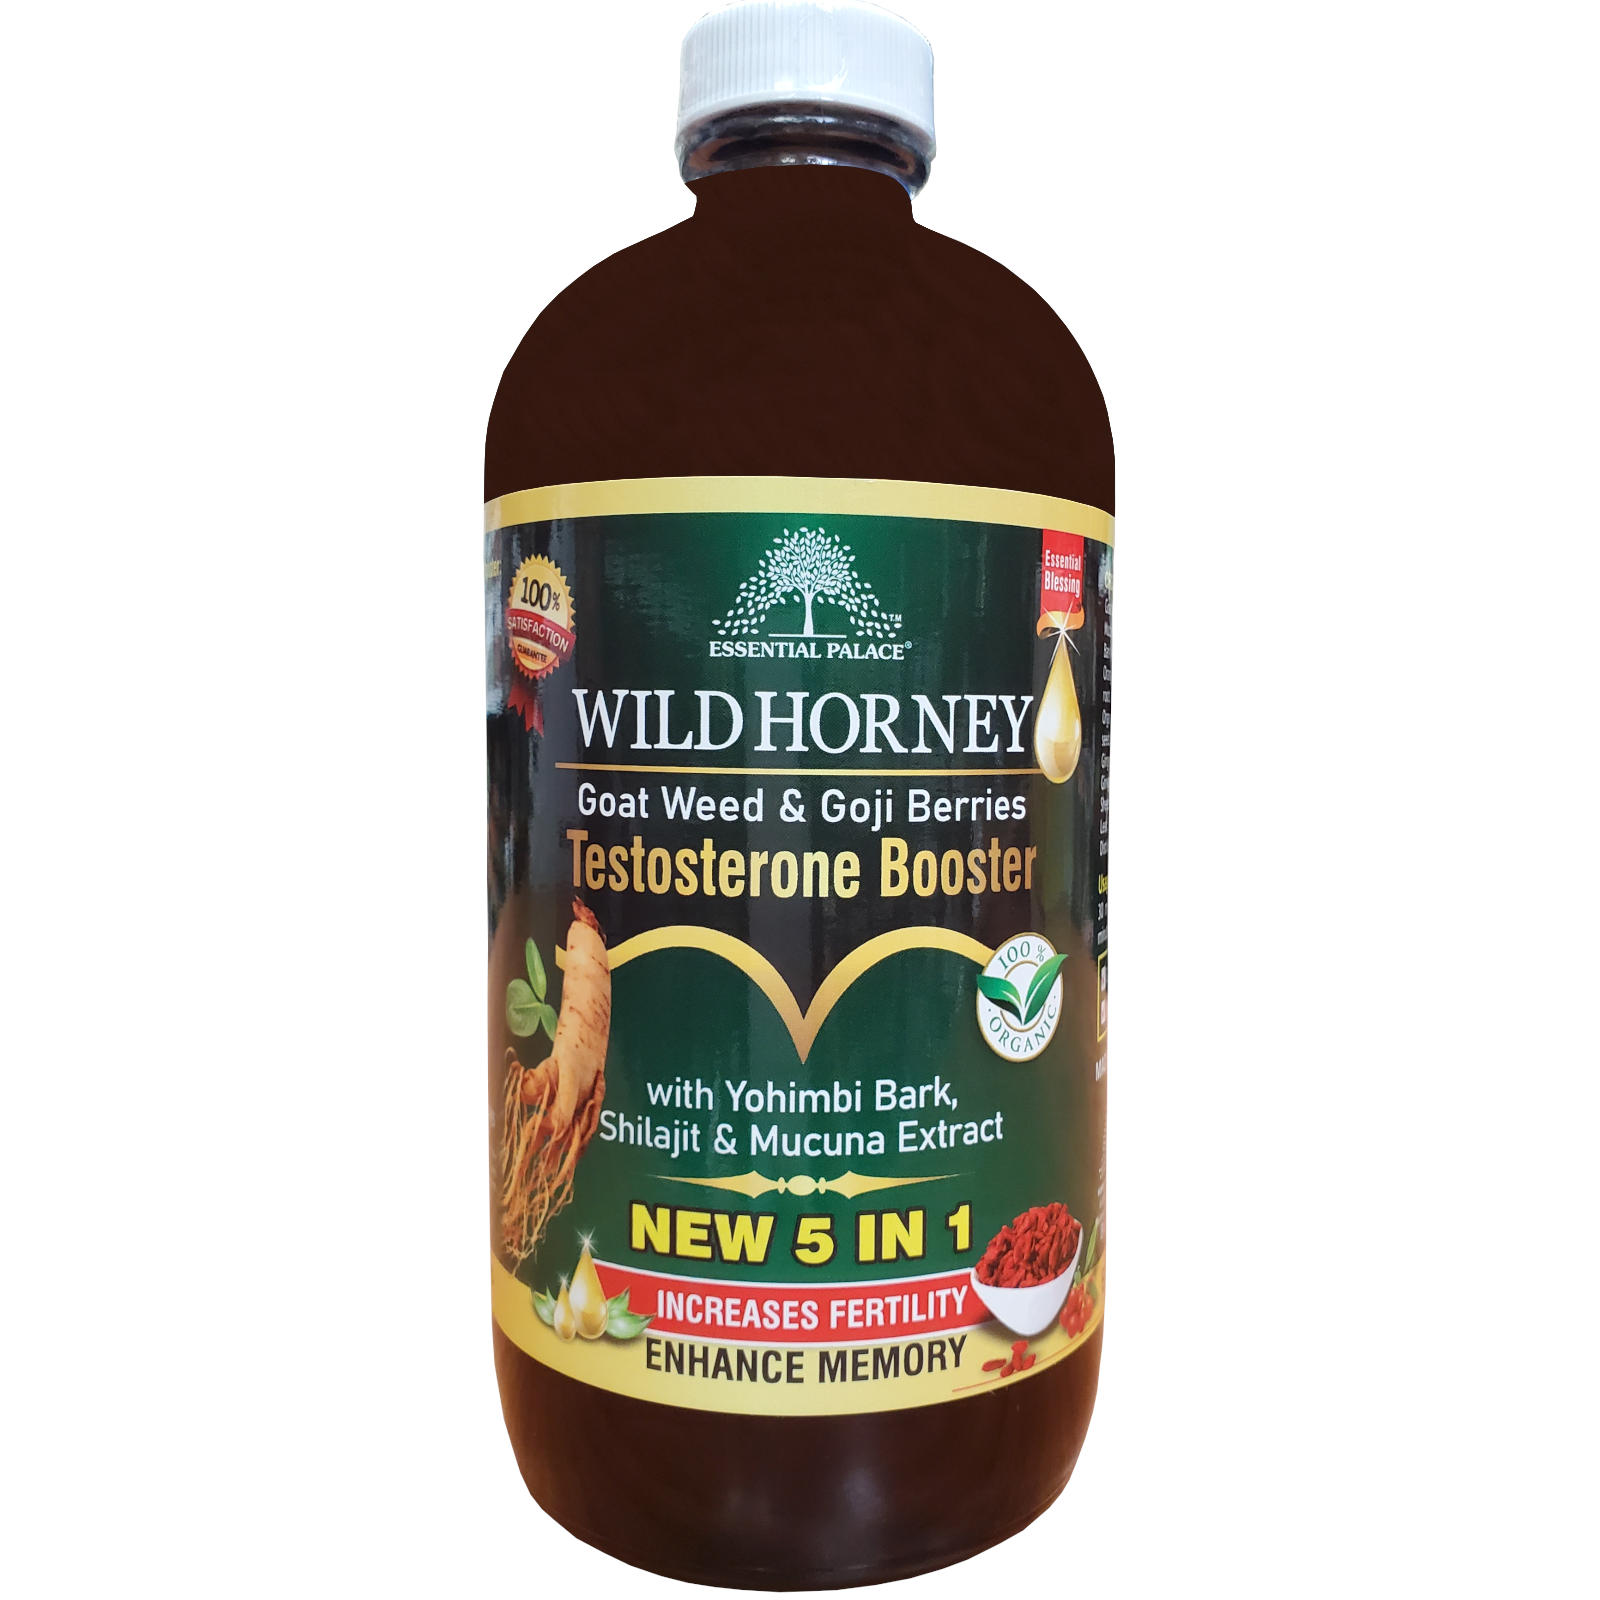 Essential Palace Organic Wild Horney With Goat Weed & Goji Berries 5 IN 1 16 OZ Front